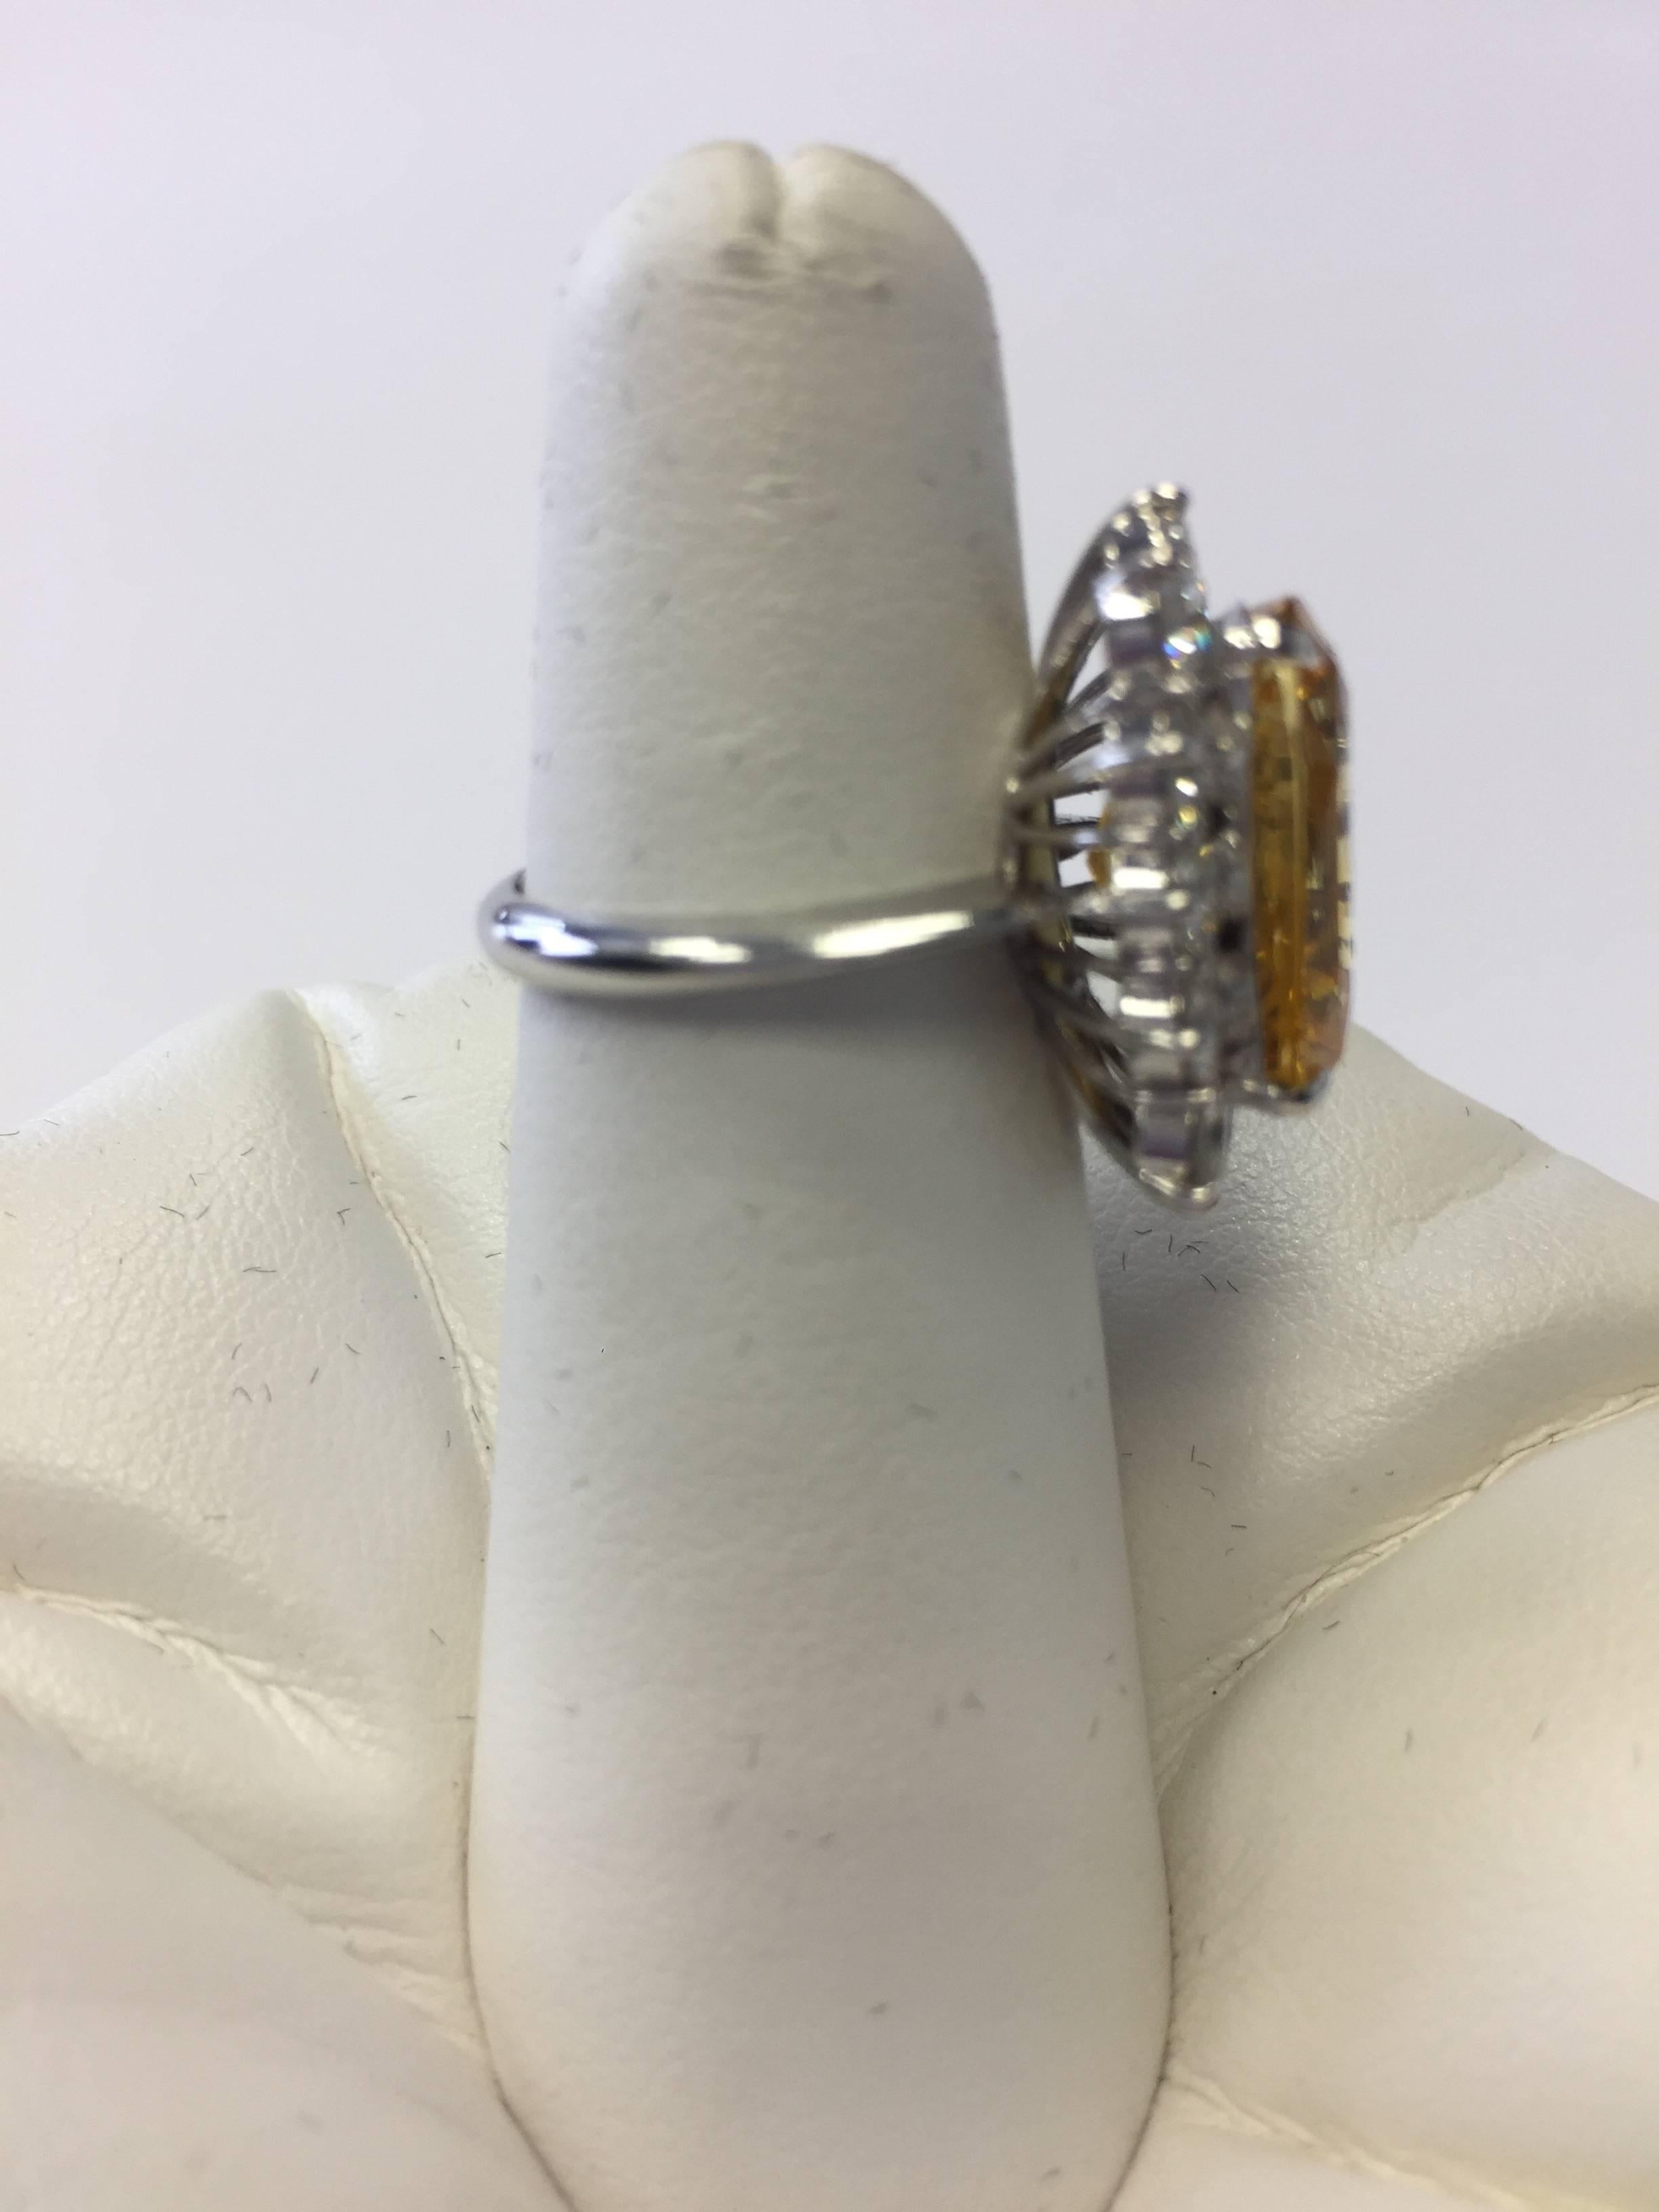 Bright canary yellow sapphire cushion surrounded with white diamonds in a delicate 18k yellow gold mounting.  AGL Certified. Size 5.5.